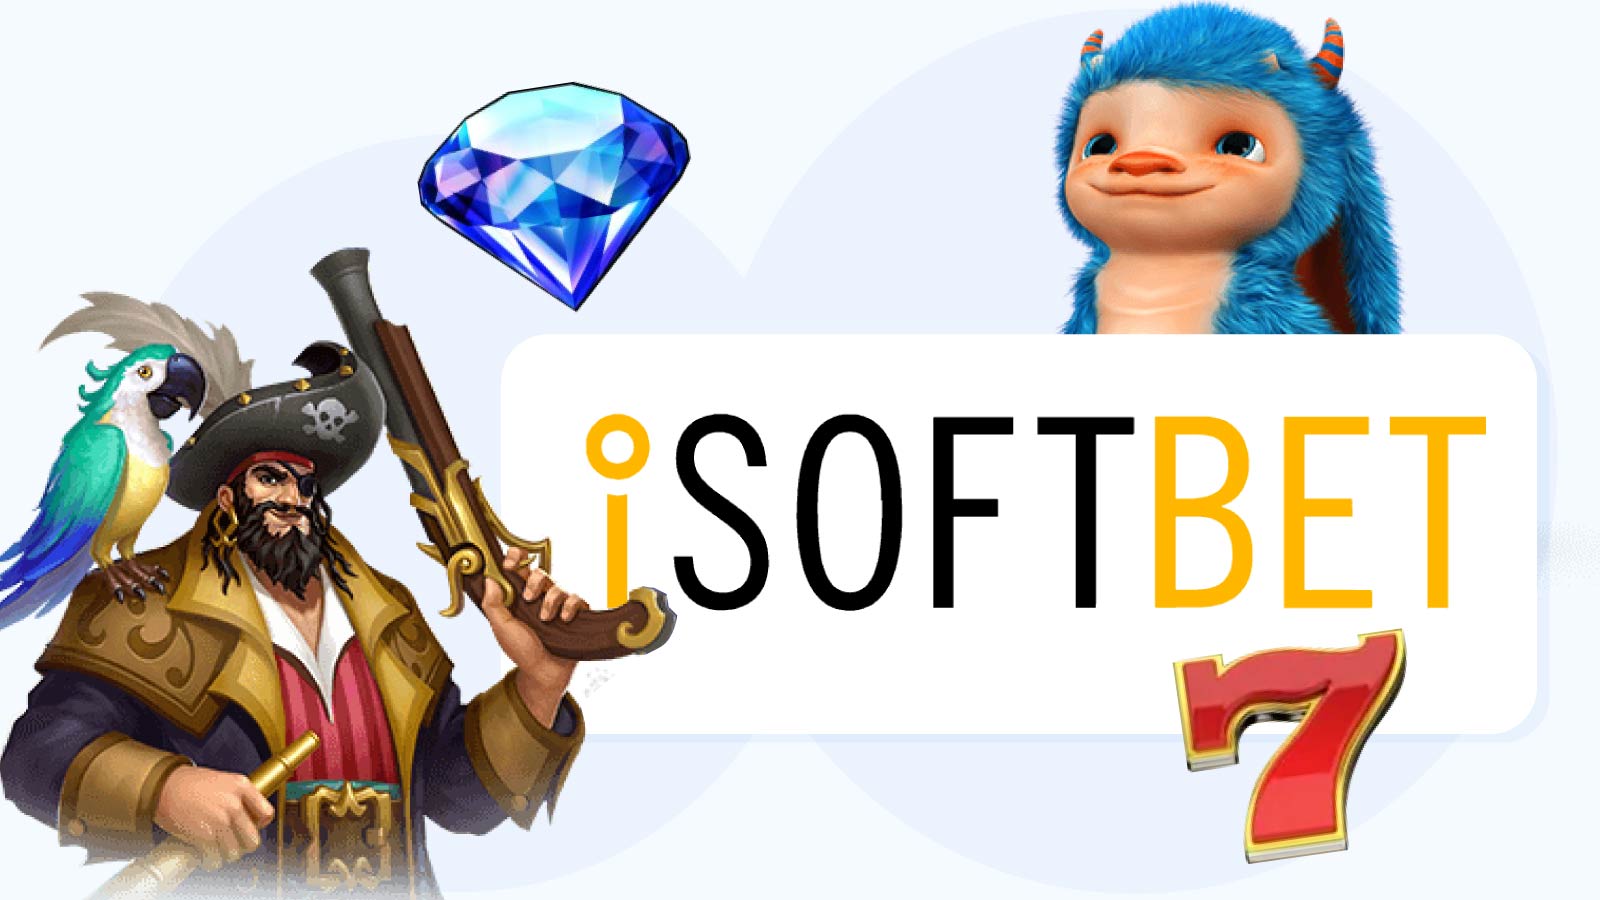 iSoftBet-Online-Casino-Software-Provider-Overview